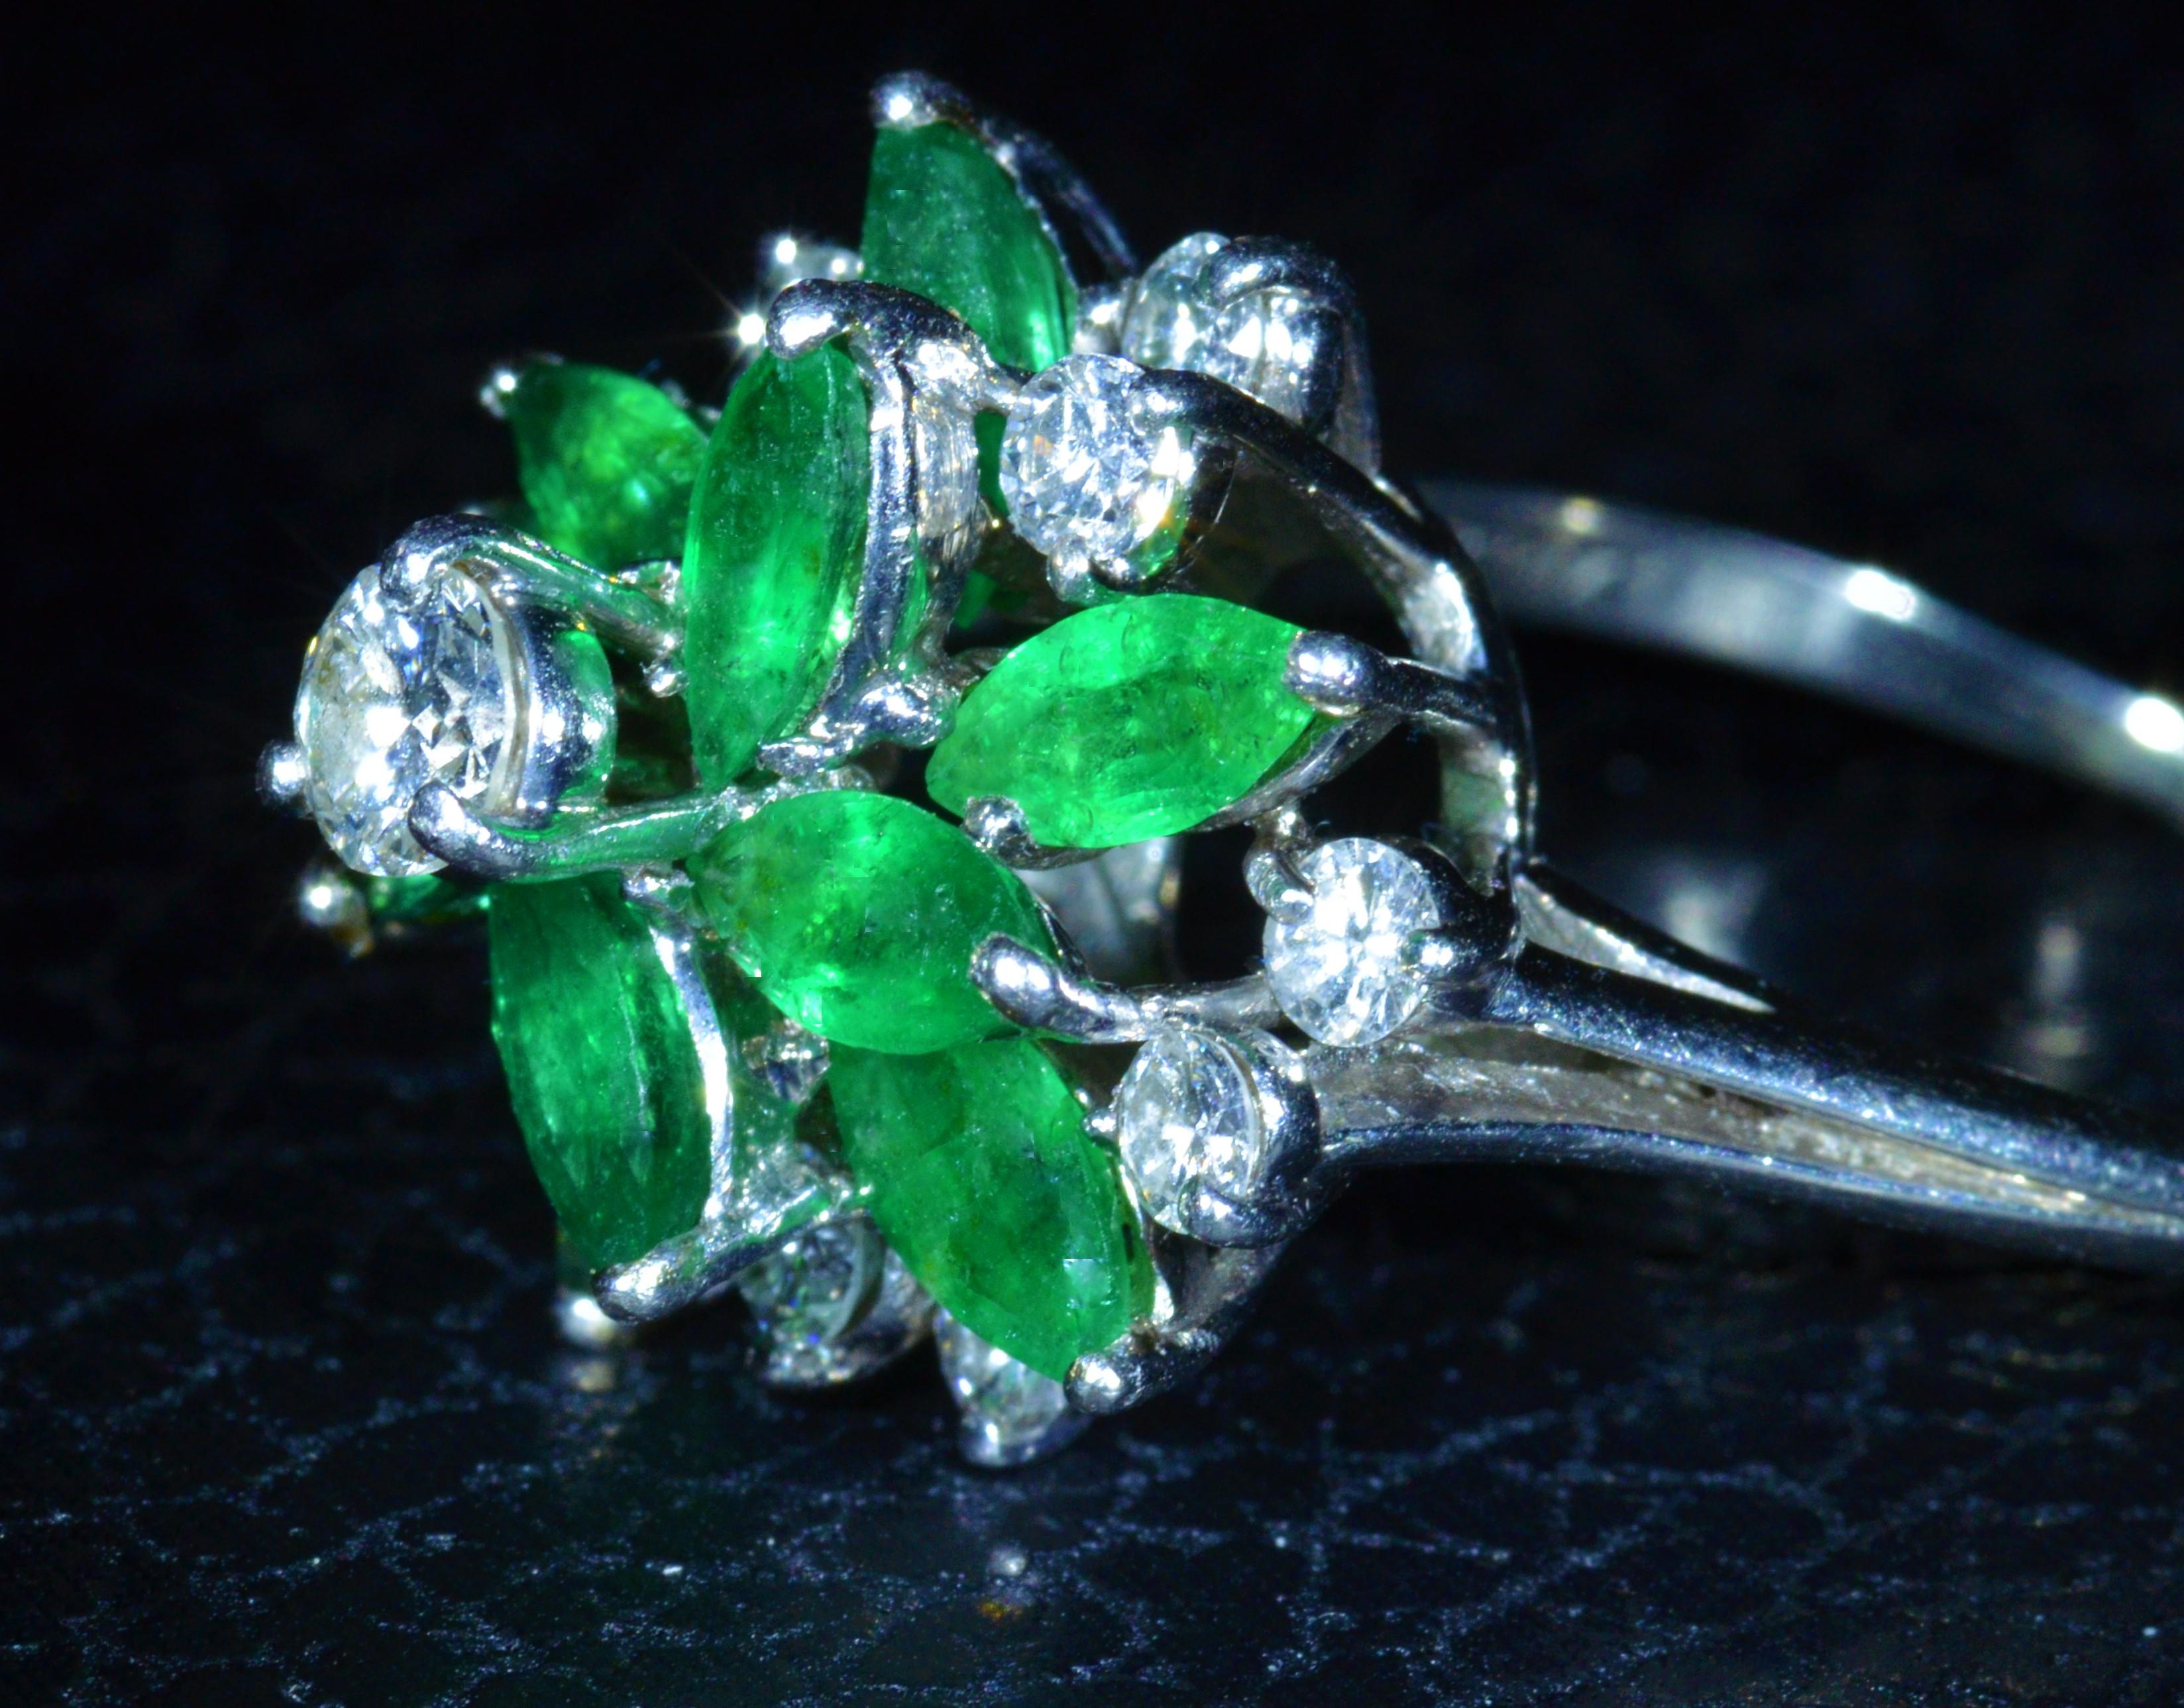 Vintage 1960's to 1970's Tiffany Emerald & Diamond Cluster Style Ring.  The ring is set with a 0.25 carat round brilliant cut diamond center stone.  Surrounding the center are 0.60 carats total weight by measurement of diamonds and 2.50 carats total